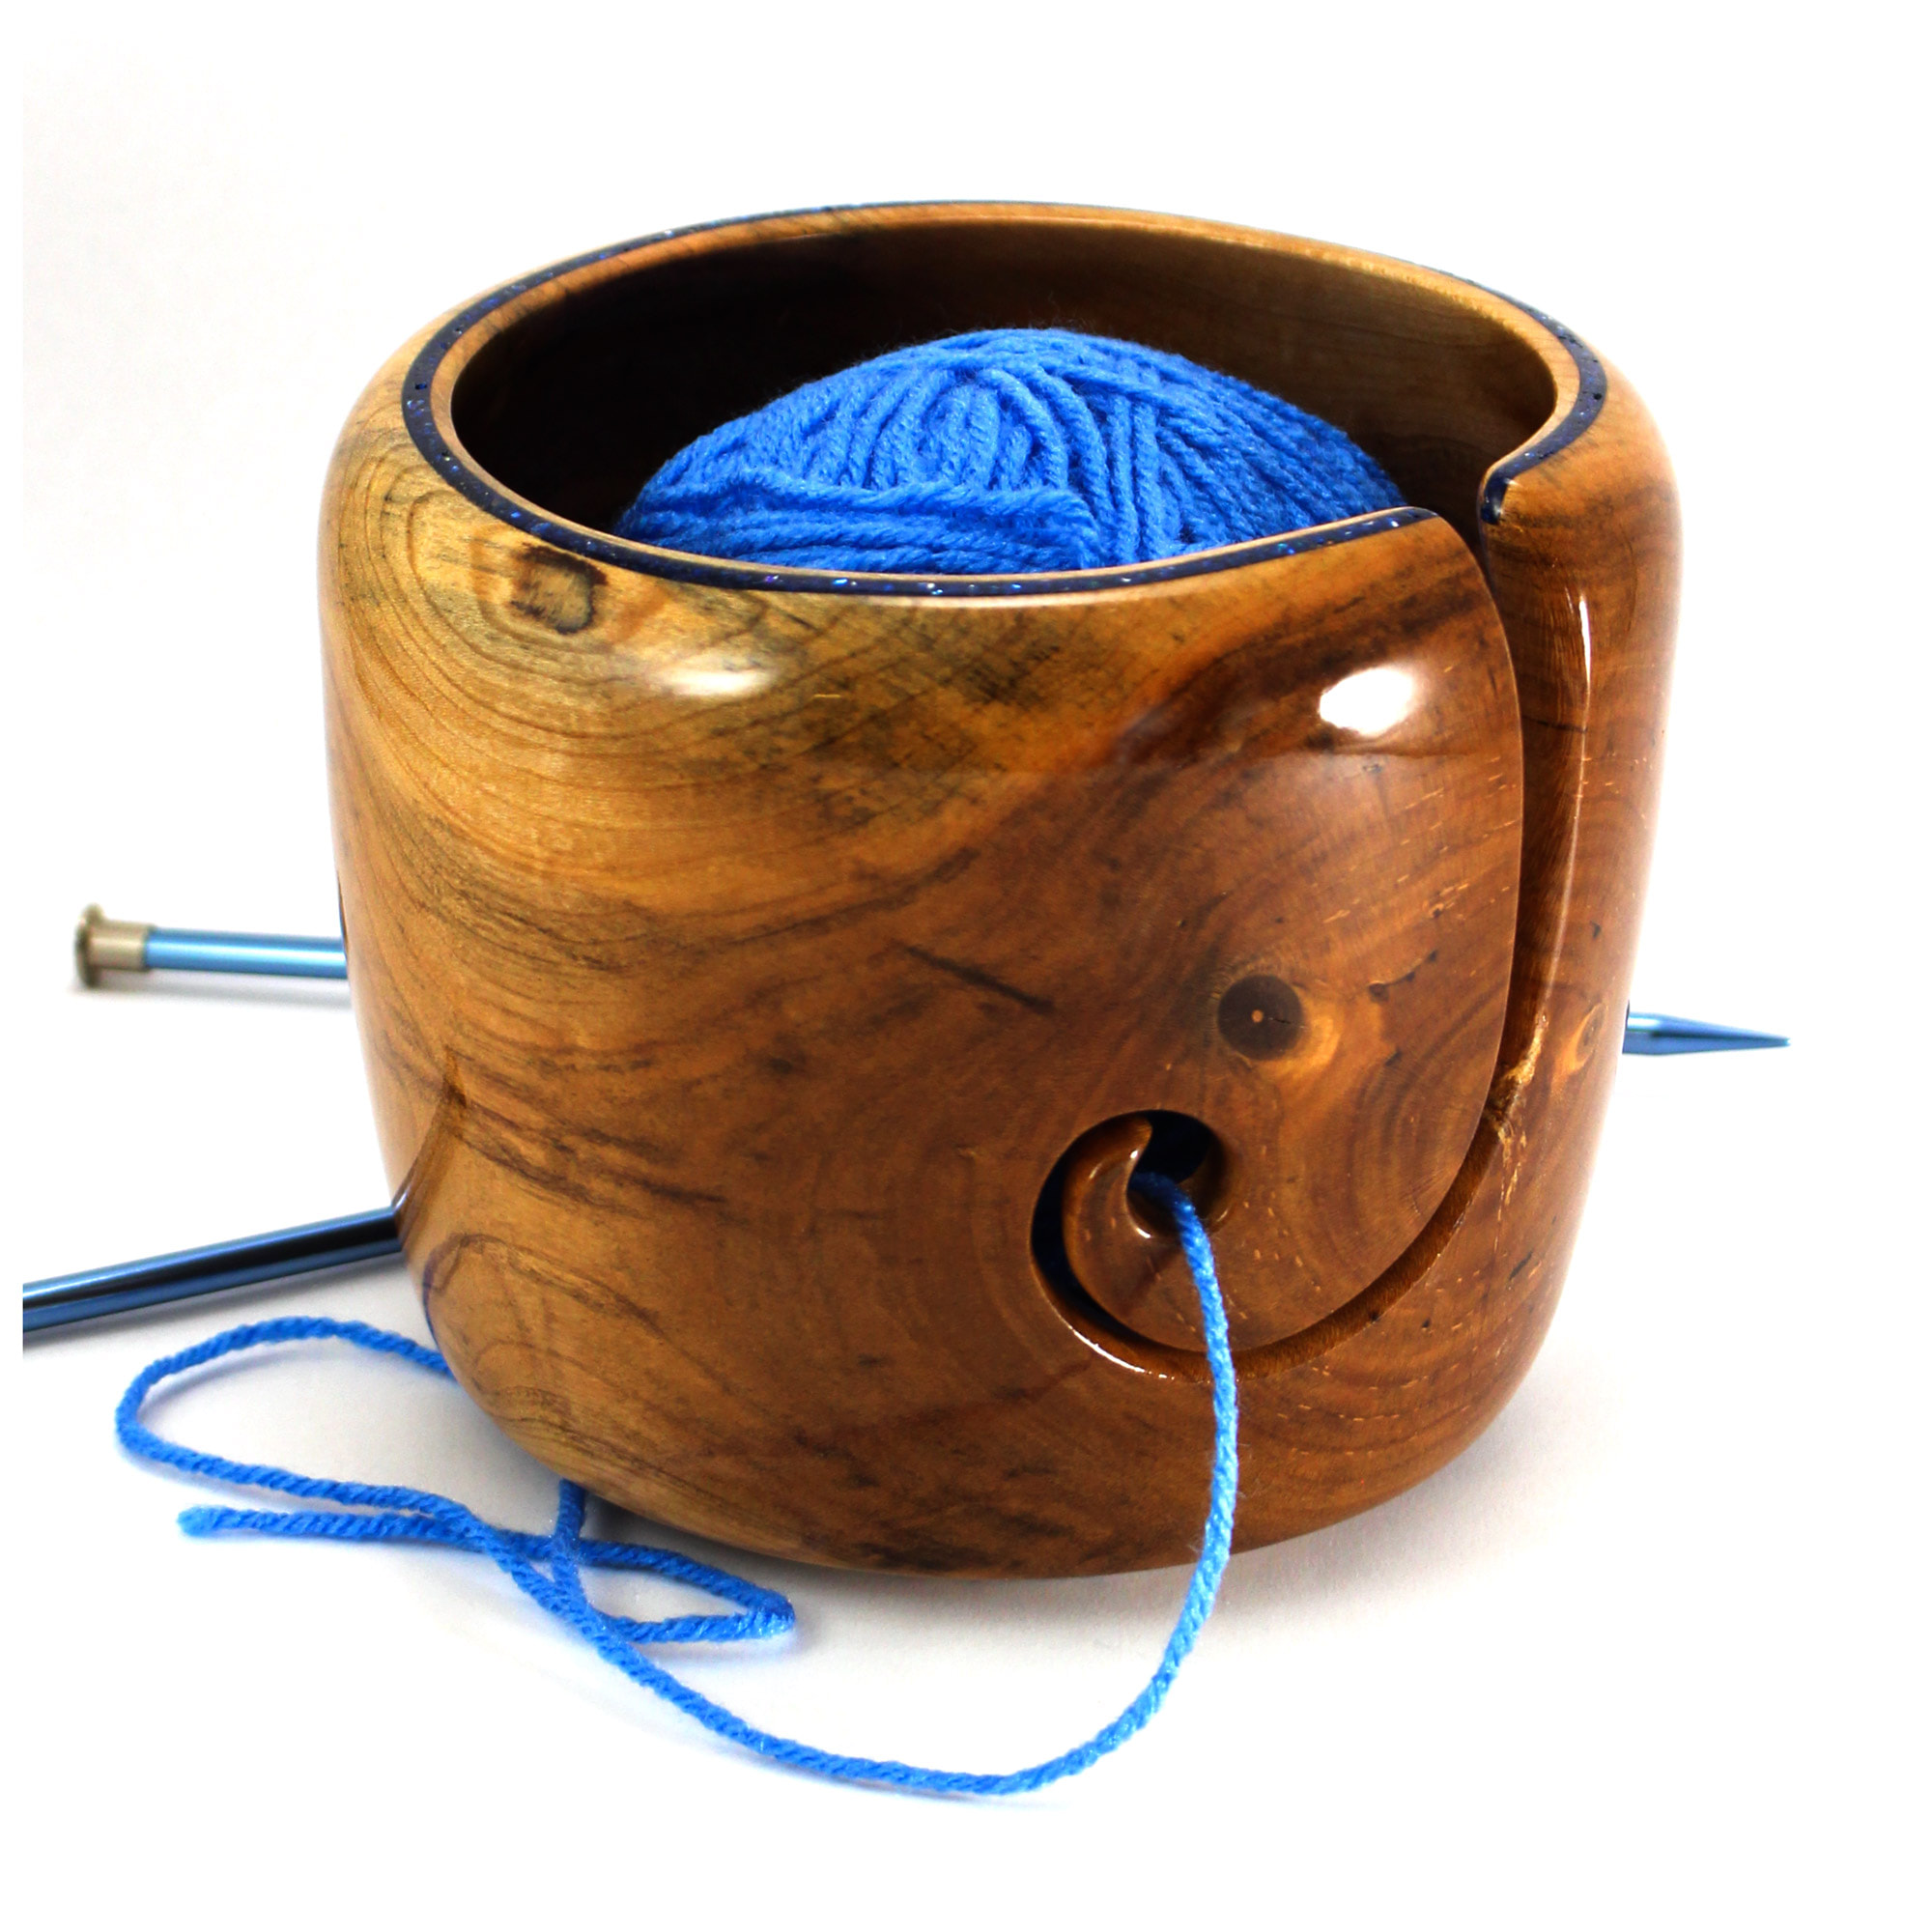 Large Wooden Yarn Bowl, Sparkle Inlay, Best Yarn Too for Knitting